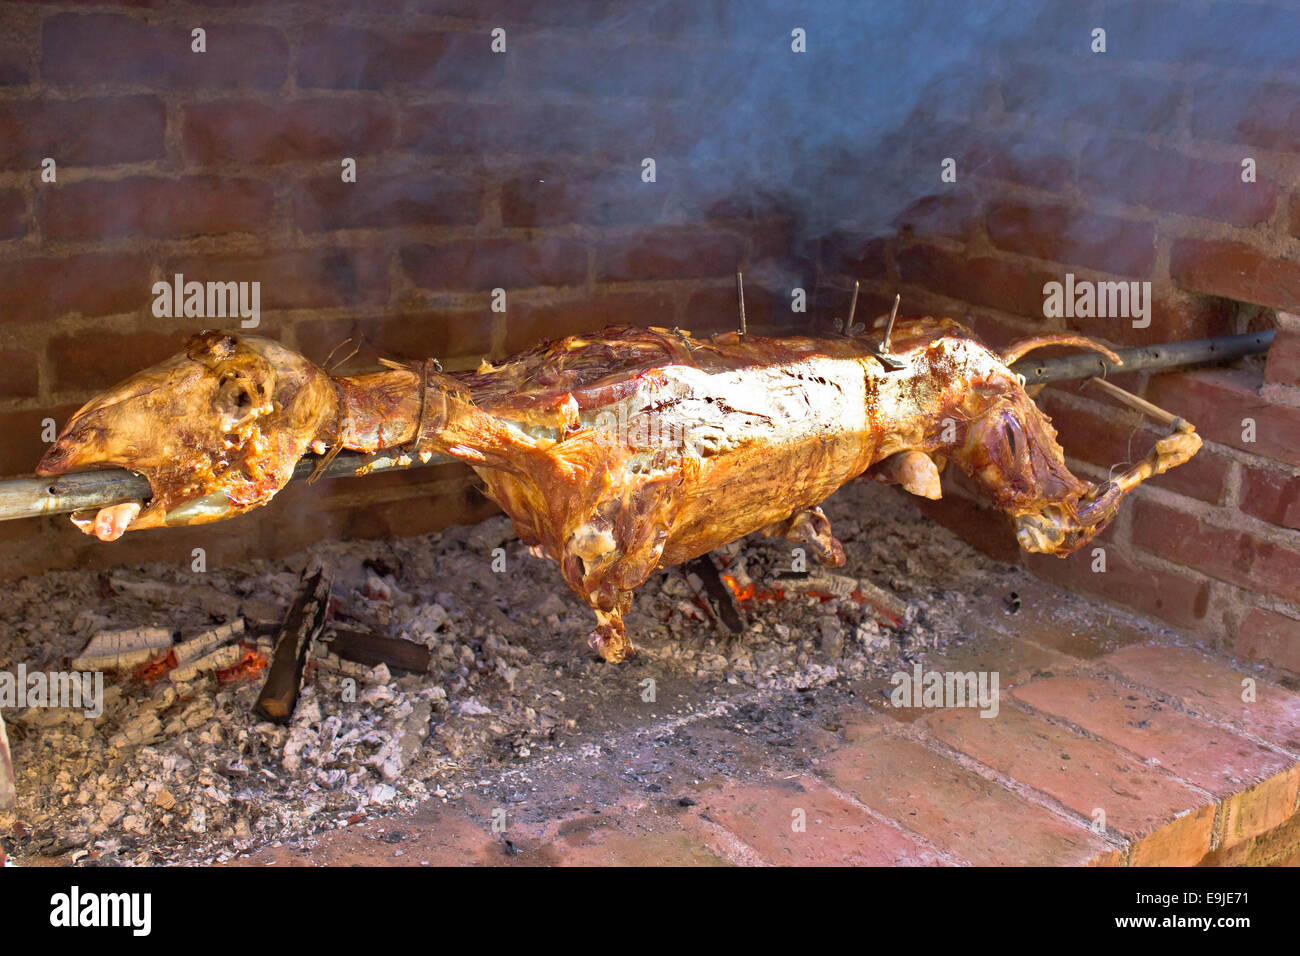 Whole lamb on spit (meat food) Stock Photo